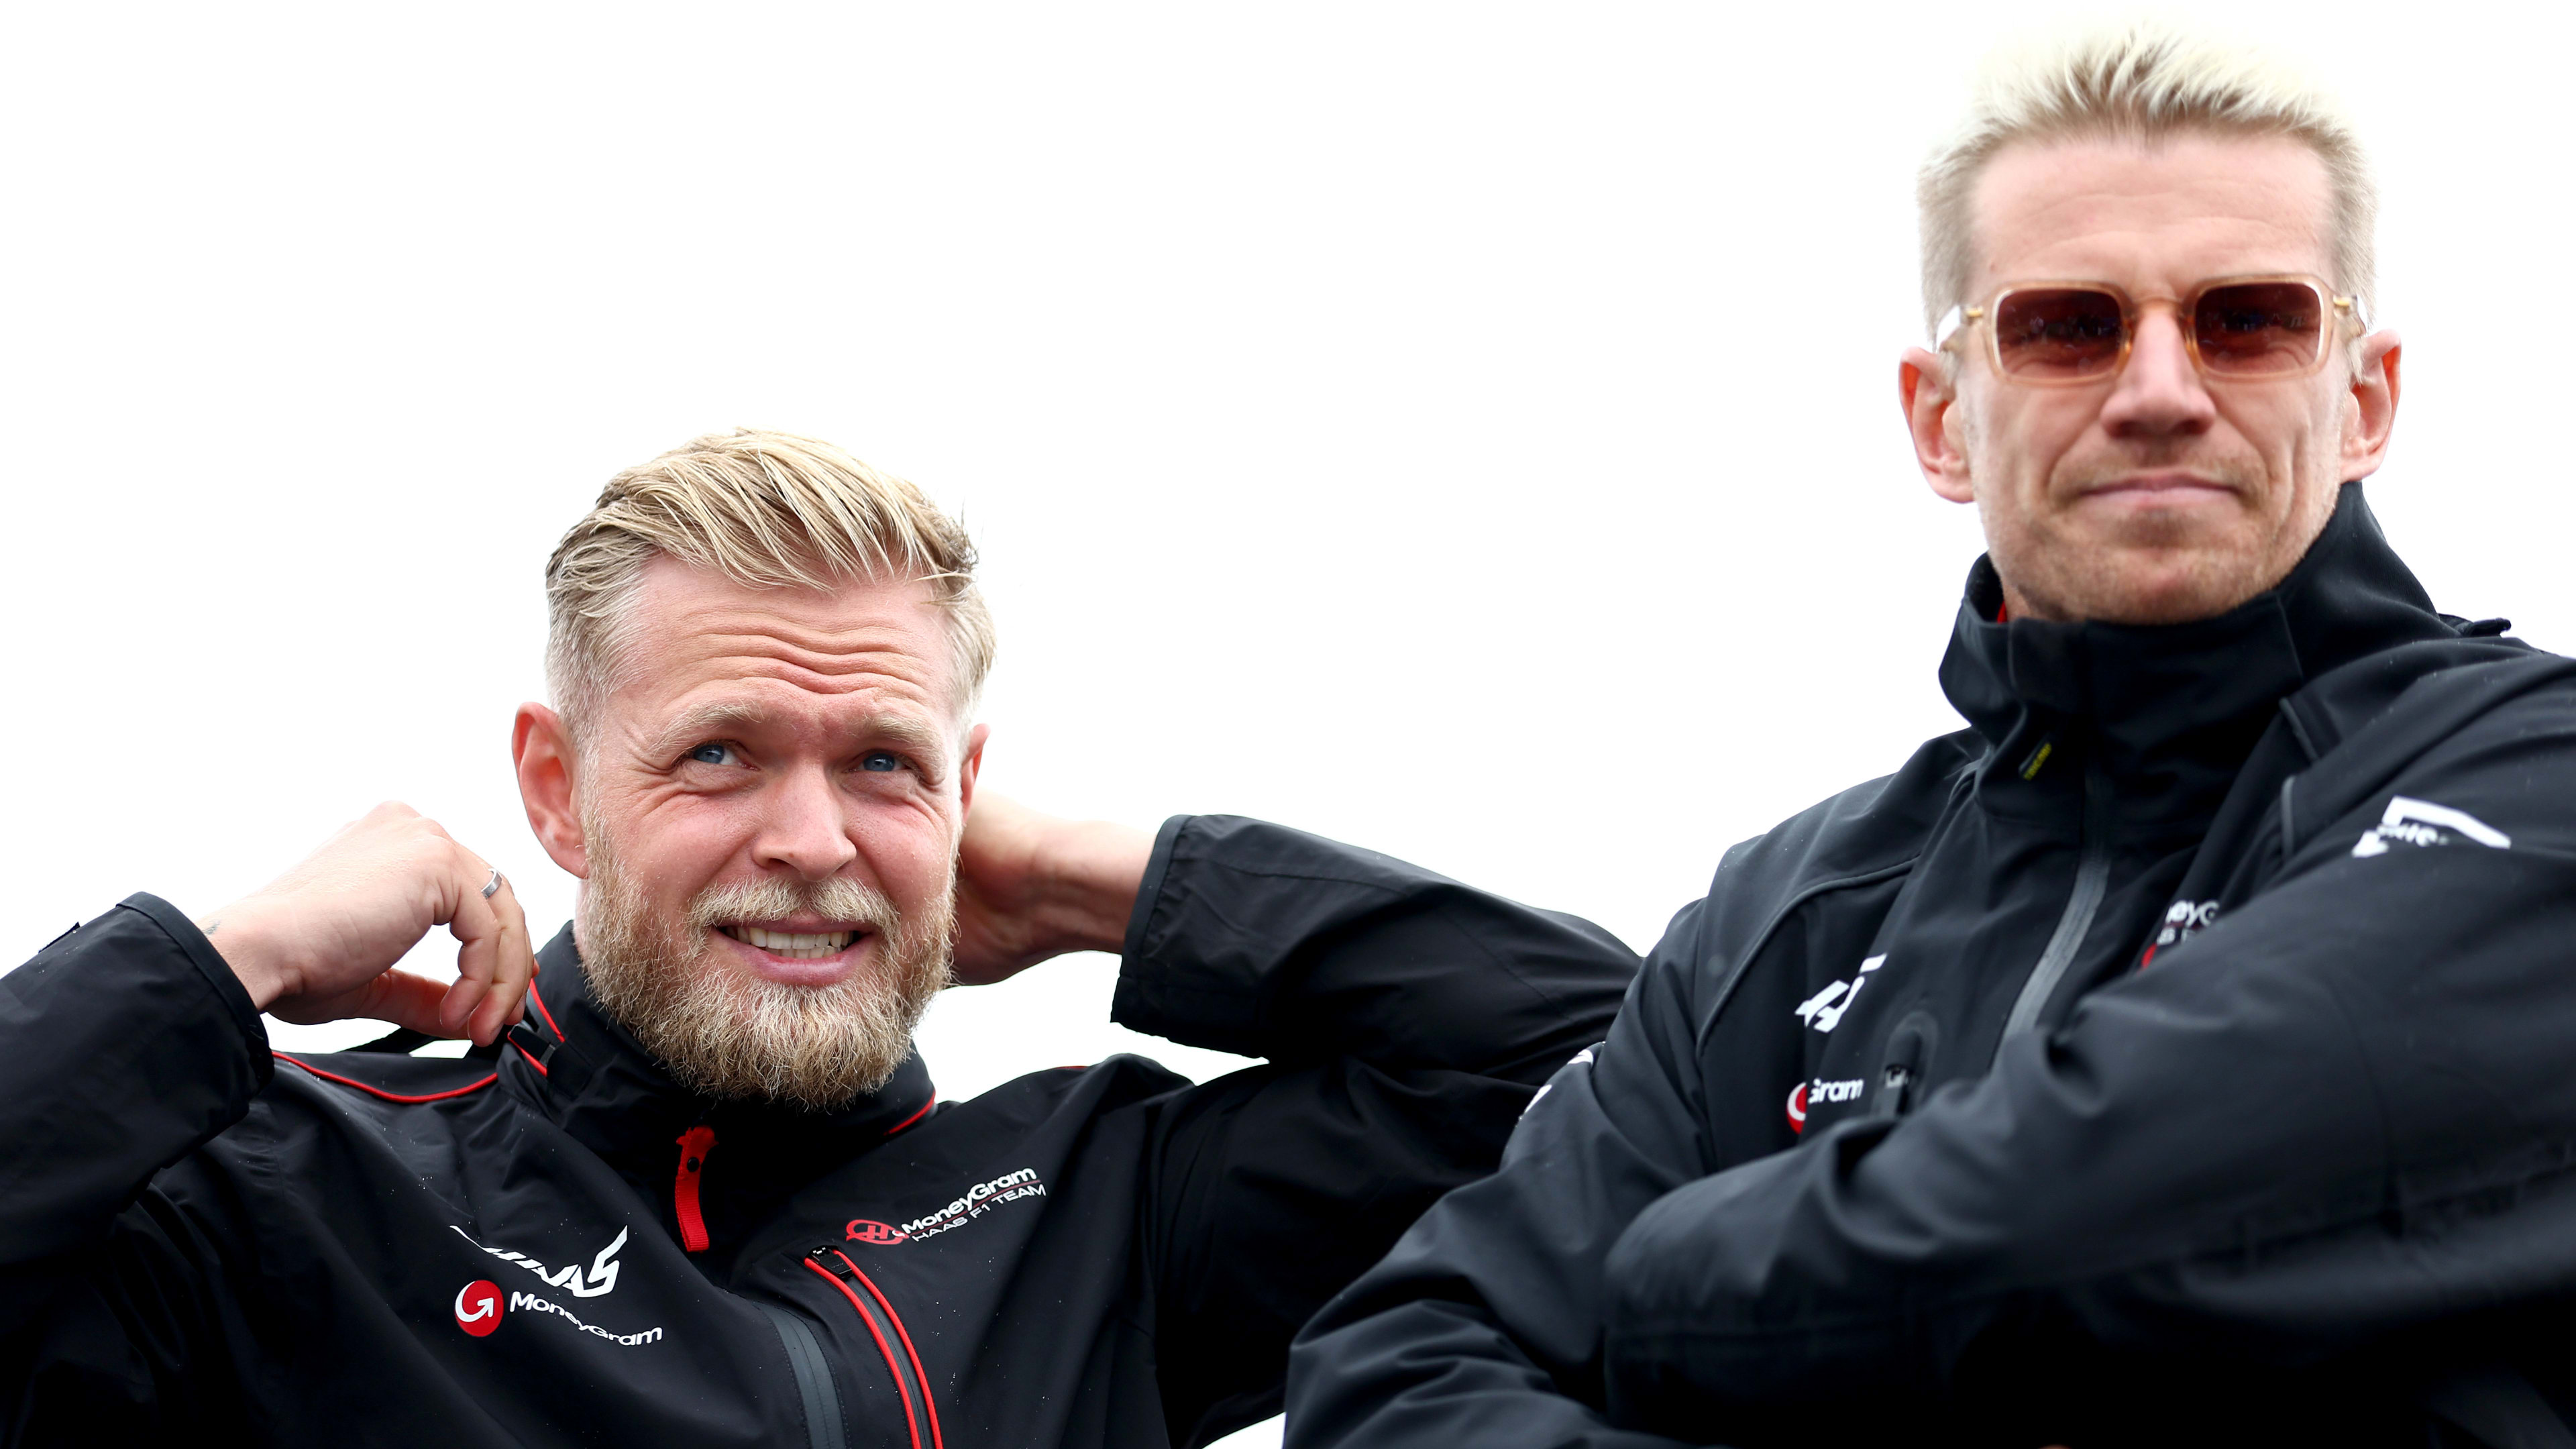 ZANDVOORT, NETHERLANDS - AUGUST 27: Kevin Magnussen of Denmark and Haas F1 and Nico Hulkenberg of